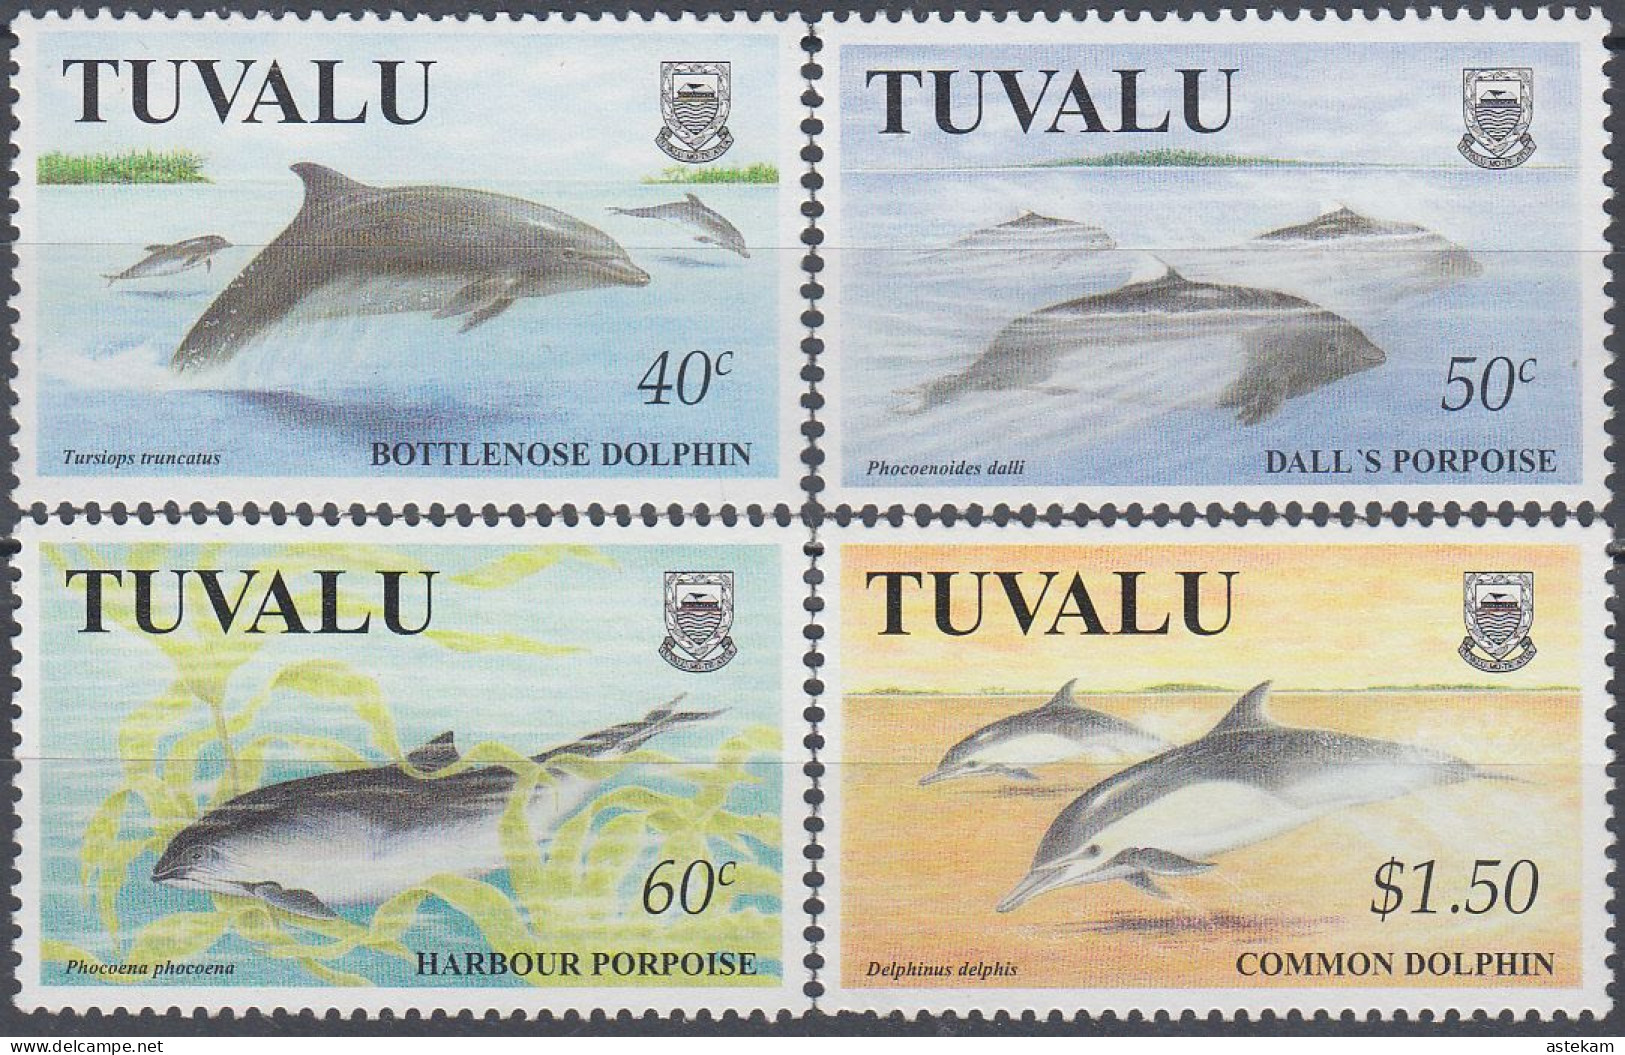 TUVALU 1998, MARINE FAUNA, DOLPHINS, COMPLETE MNH SERIES With GOOD QUALITY, *** - Tuvalu